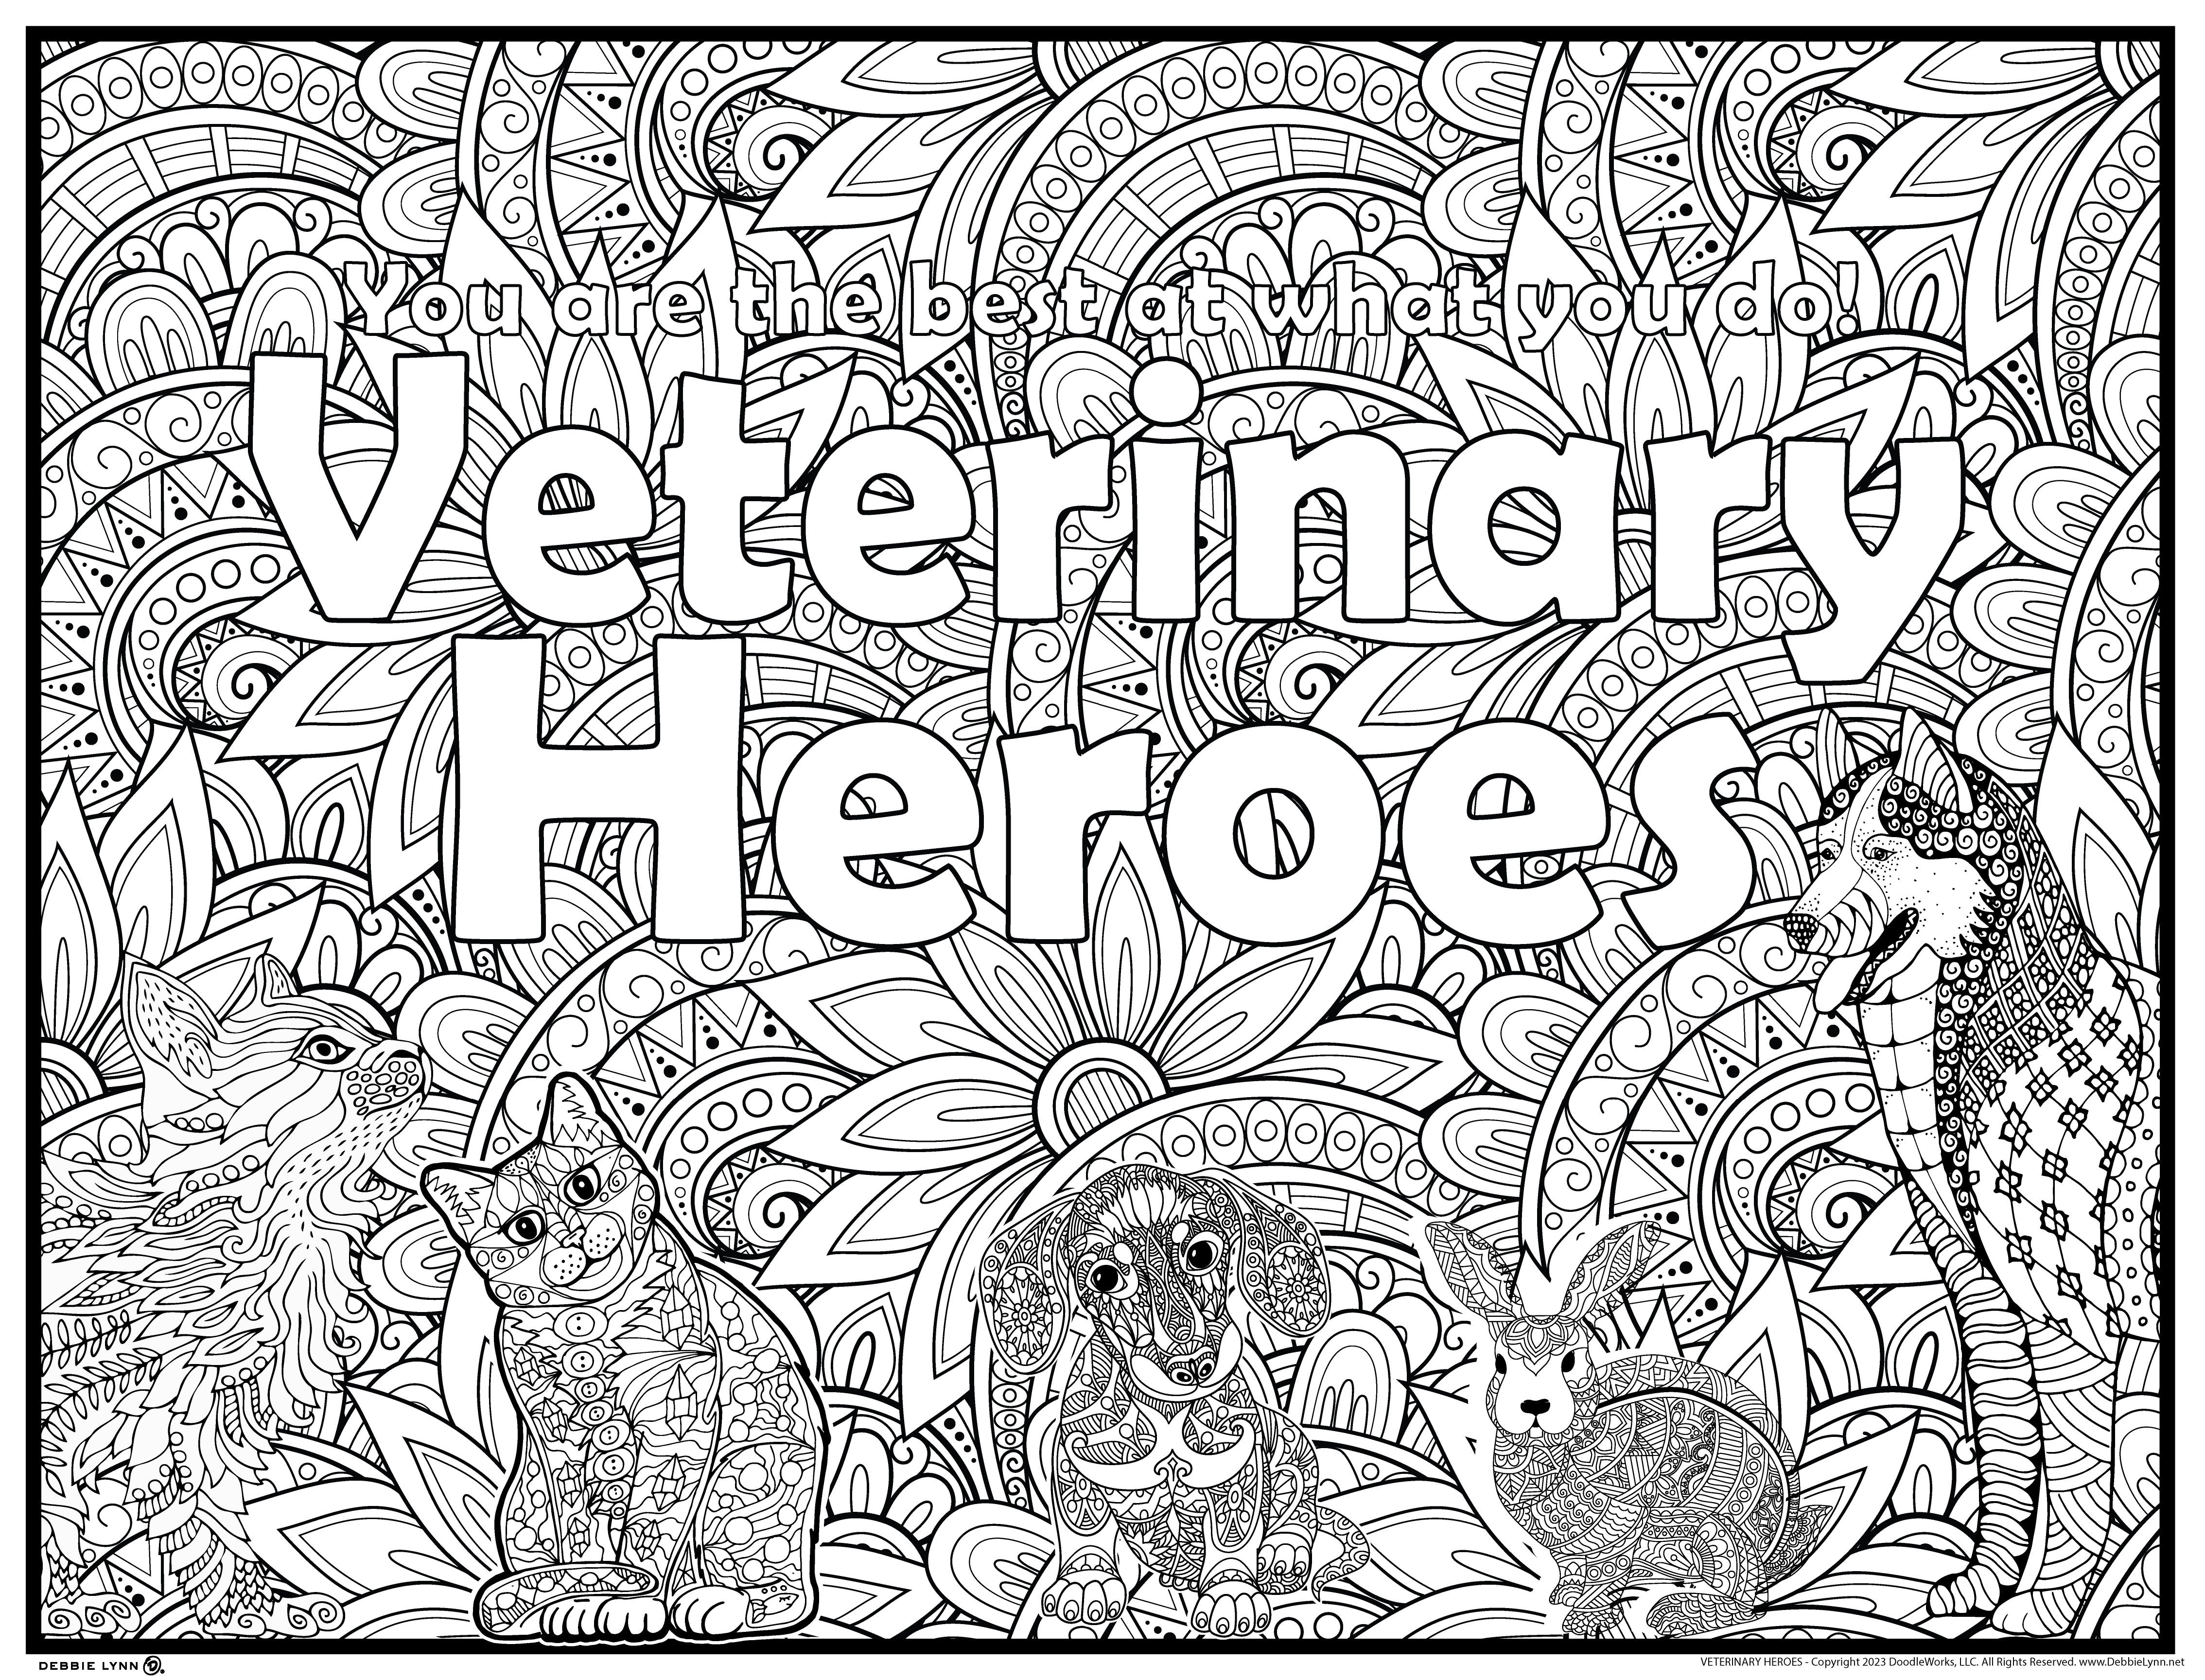 Veterinary Heroes Personalized Giant Coloring Poster 48 x 63